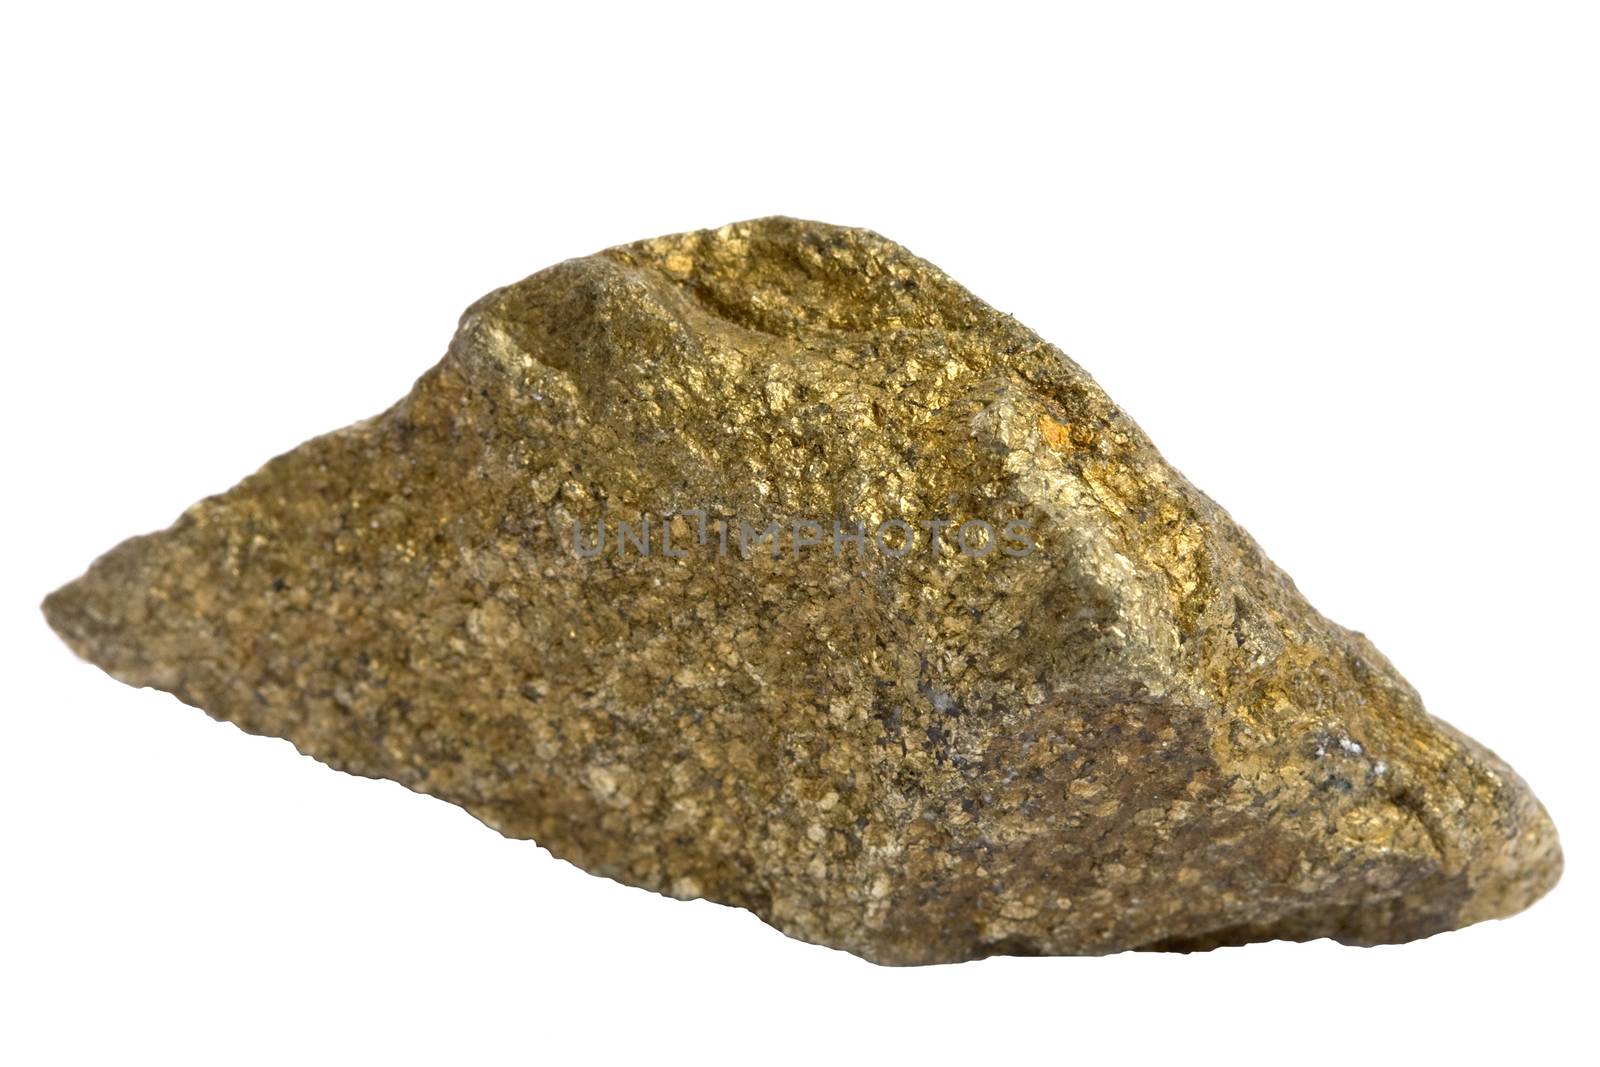 Single piece of chalcopyrite ore isolated on white